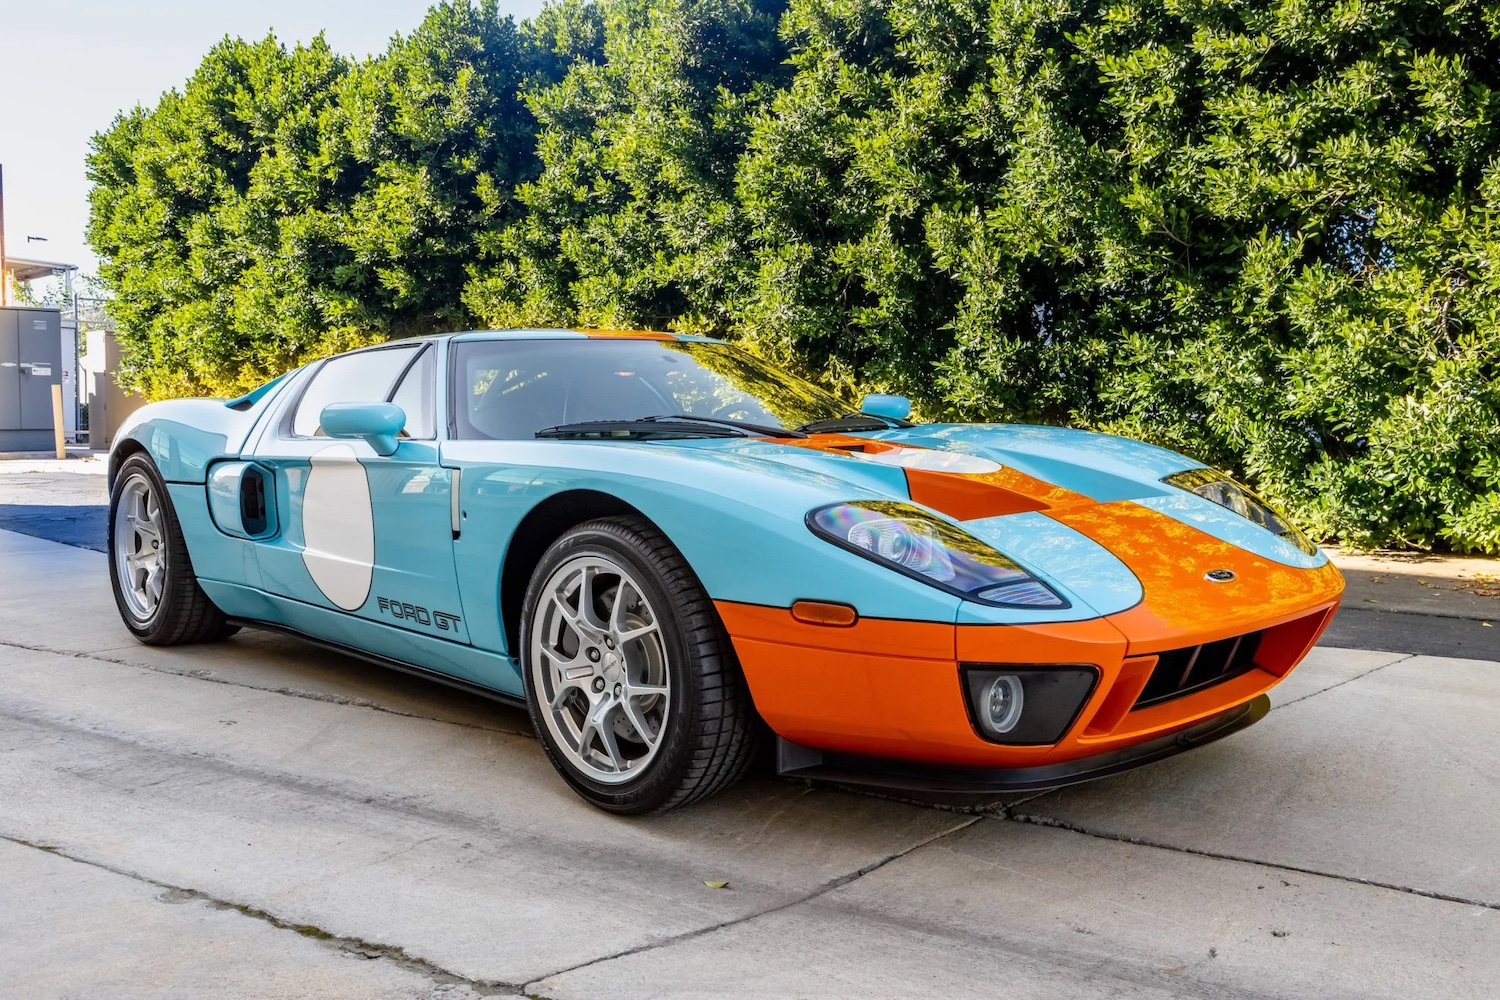 32-Mile 2006 Ford GT Heritage Edition Auction Gets Wallet-Busting Bids